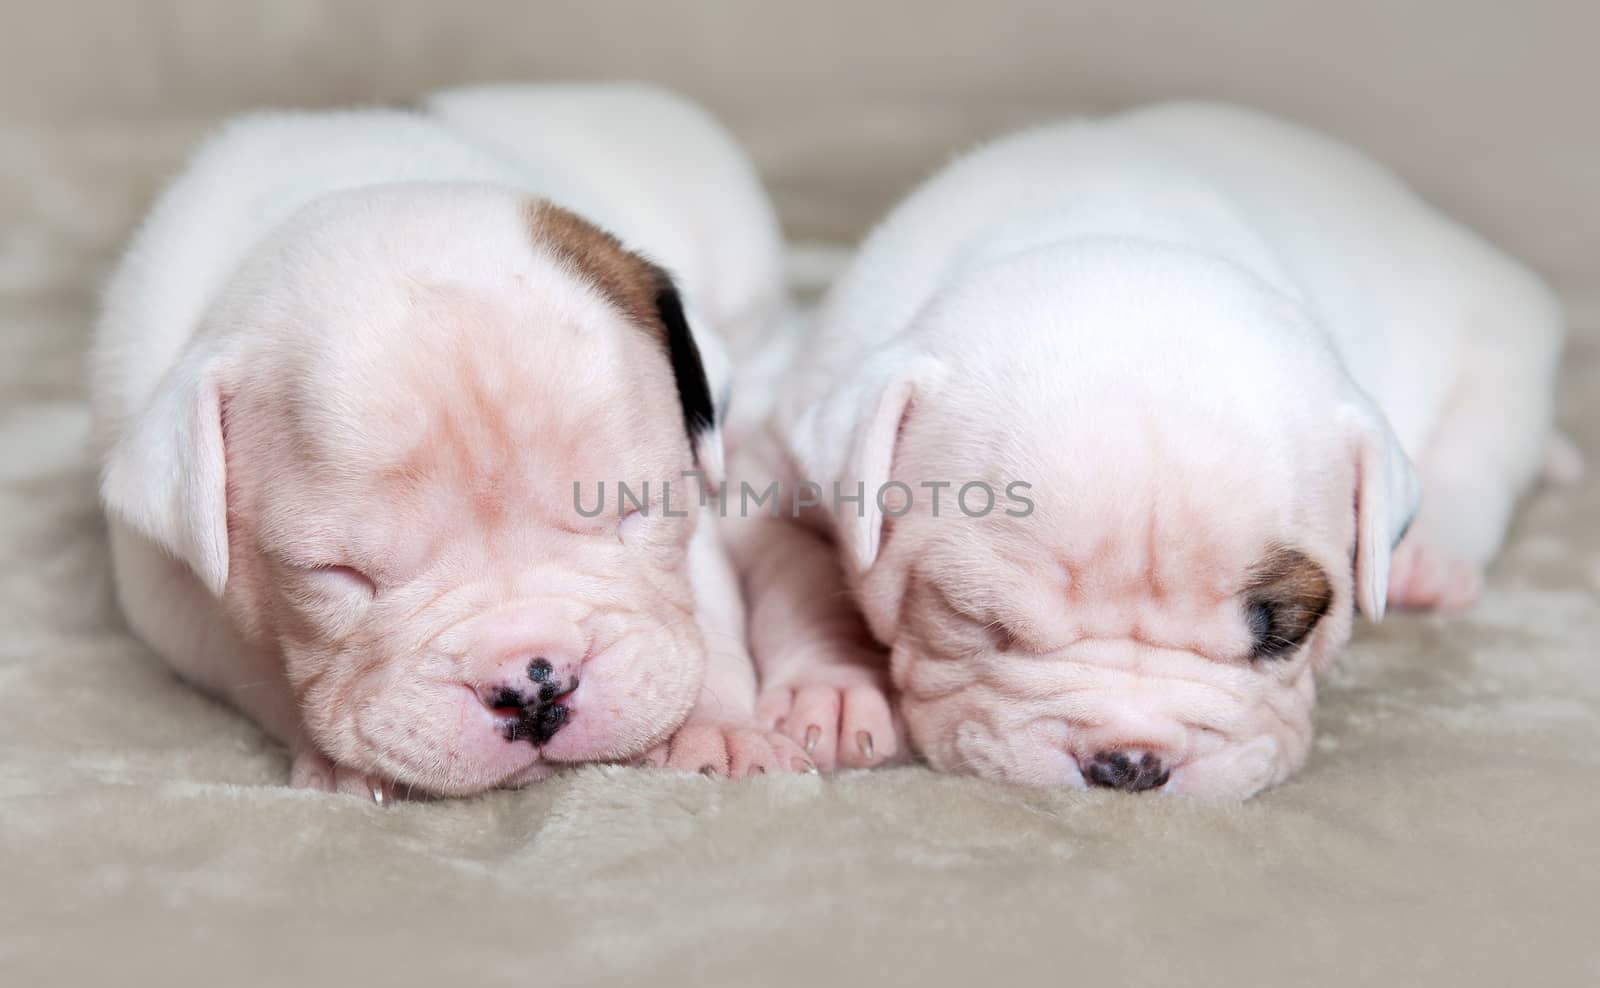 Two funny small American Bulldog puppies dogs on light background. The puppies are sleeping